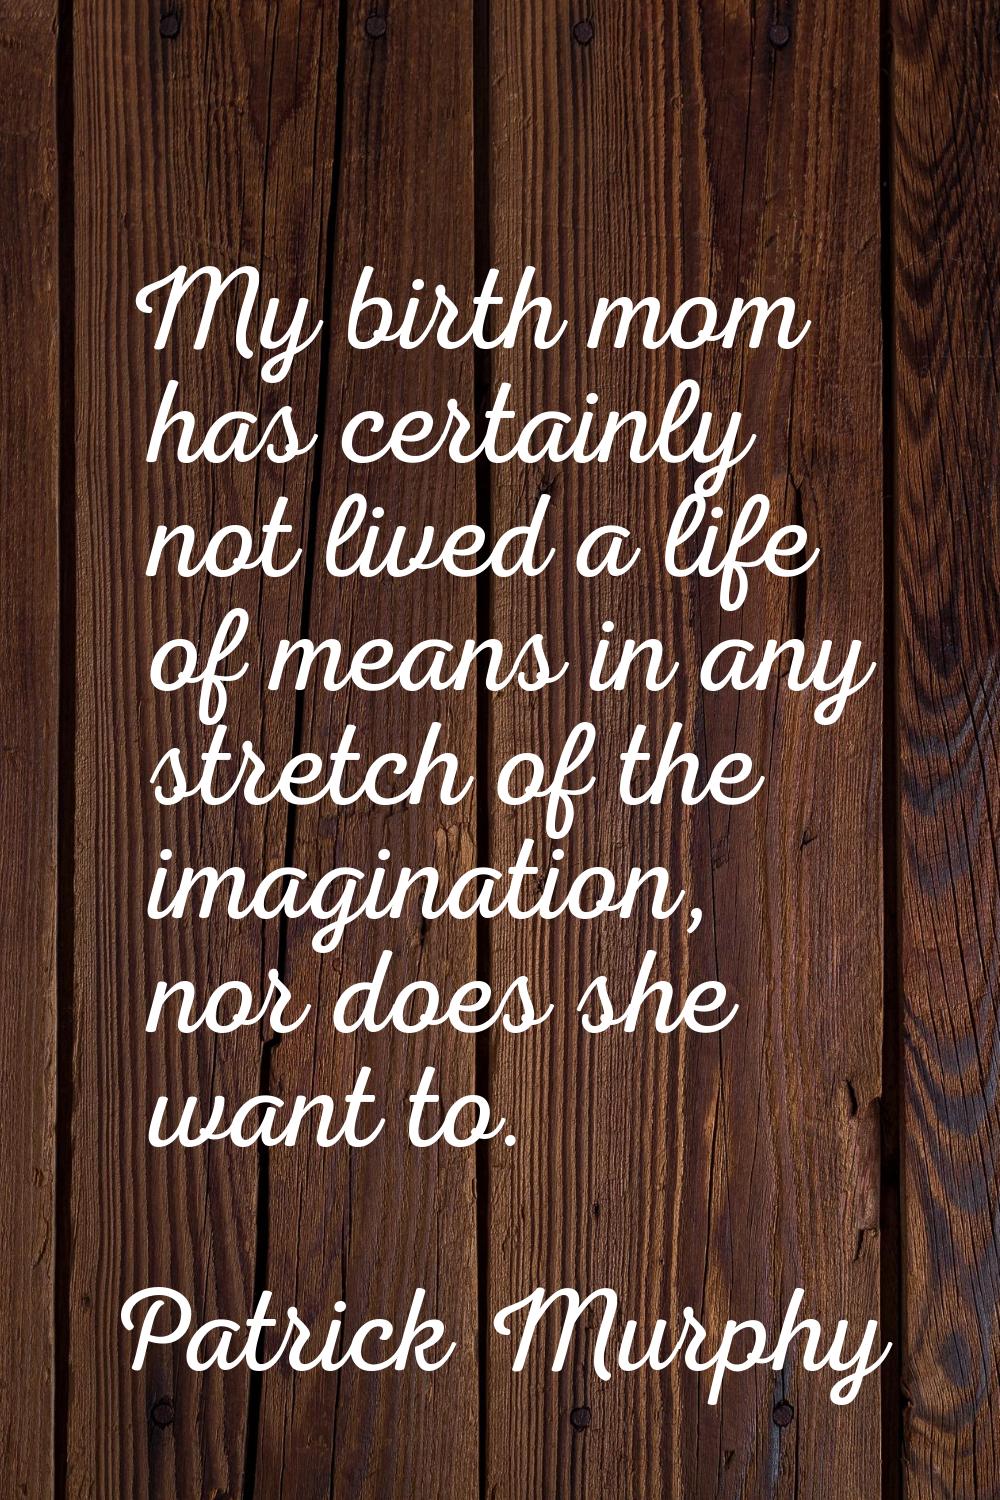 My birth mom has certainly not lived a life of means in any stretch of the imagination, nor does sh